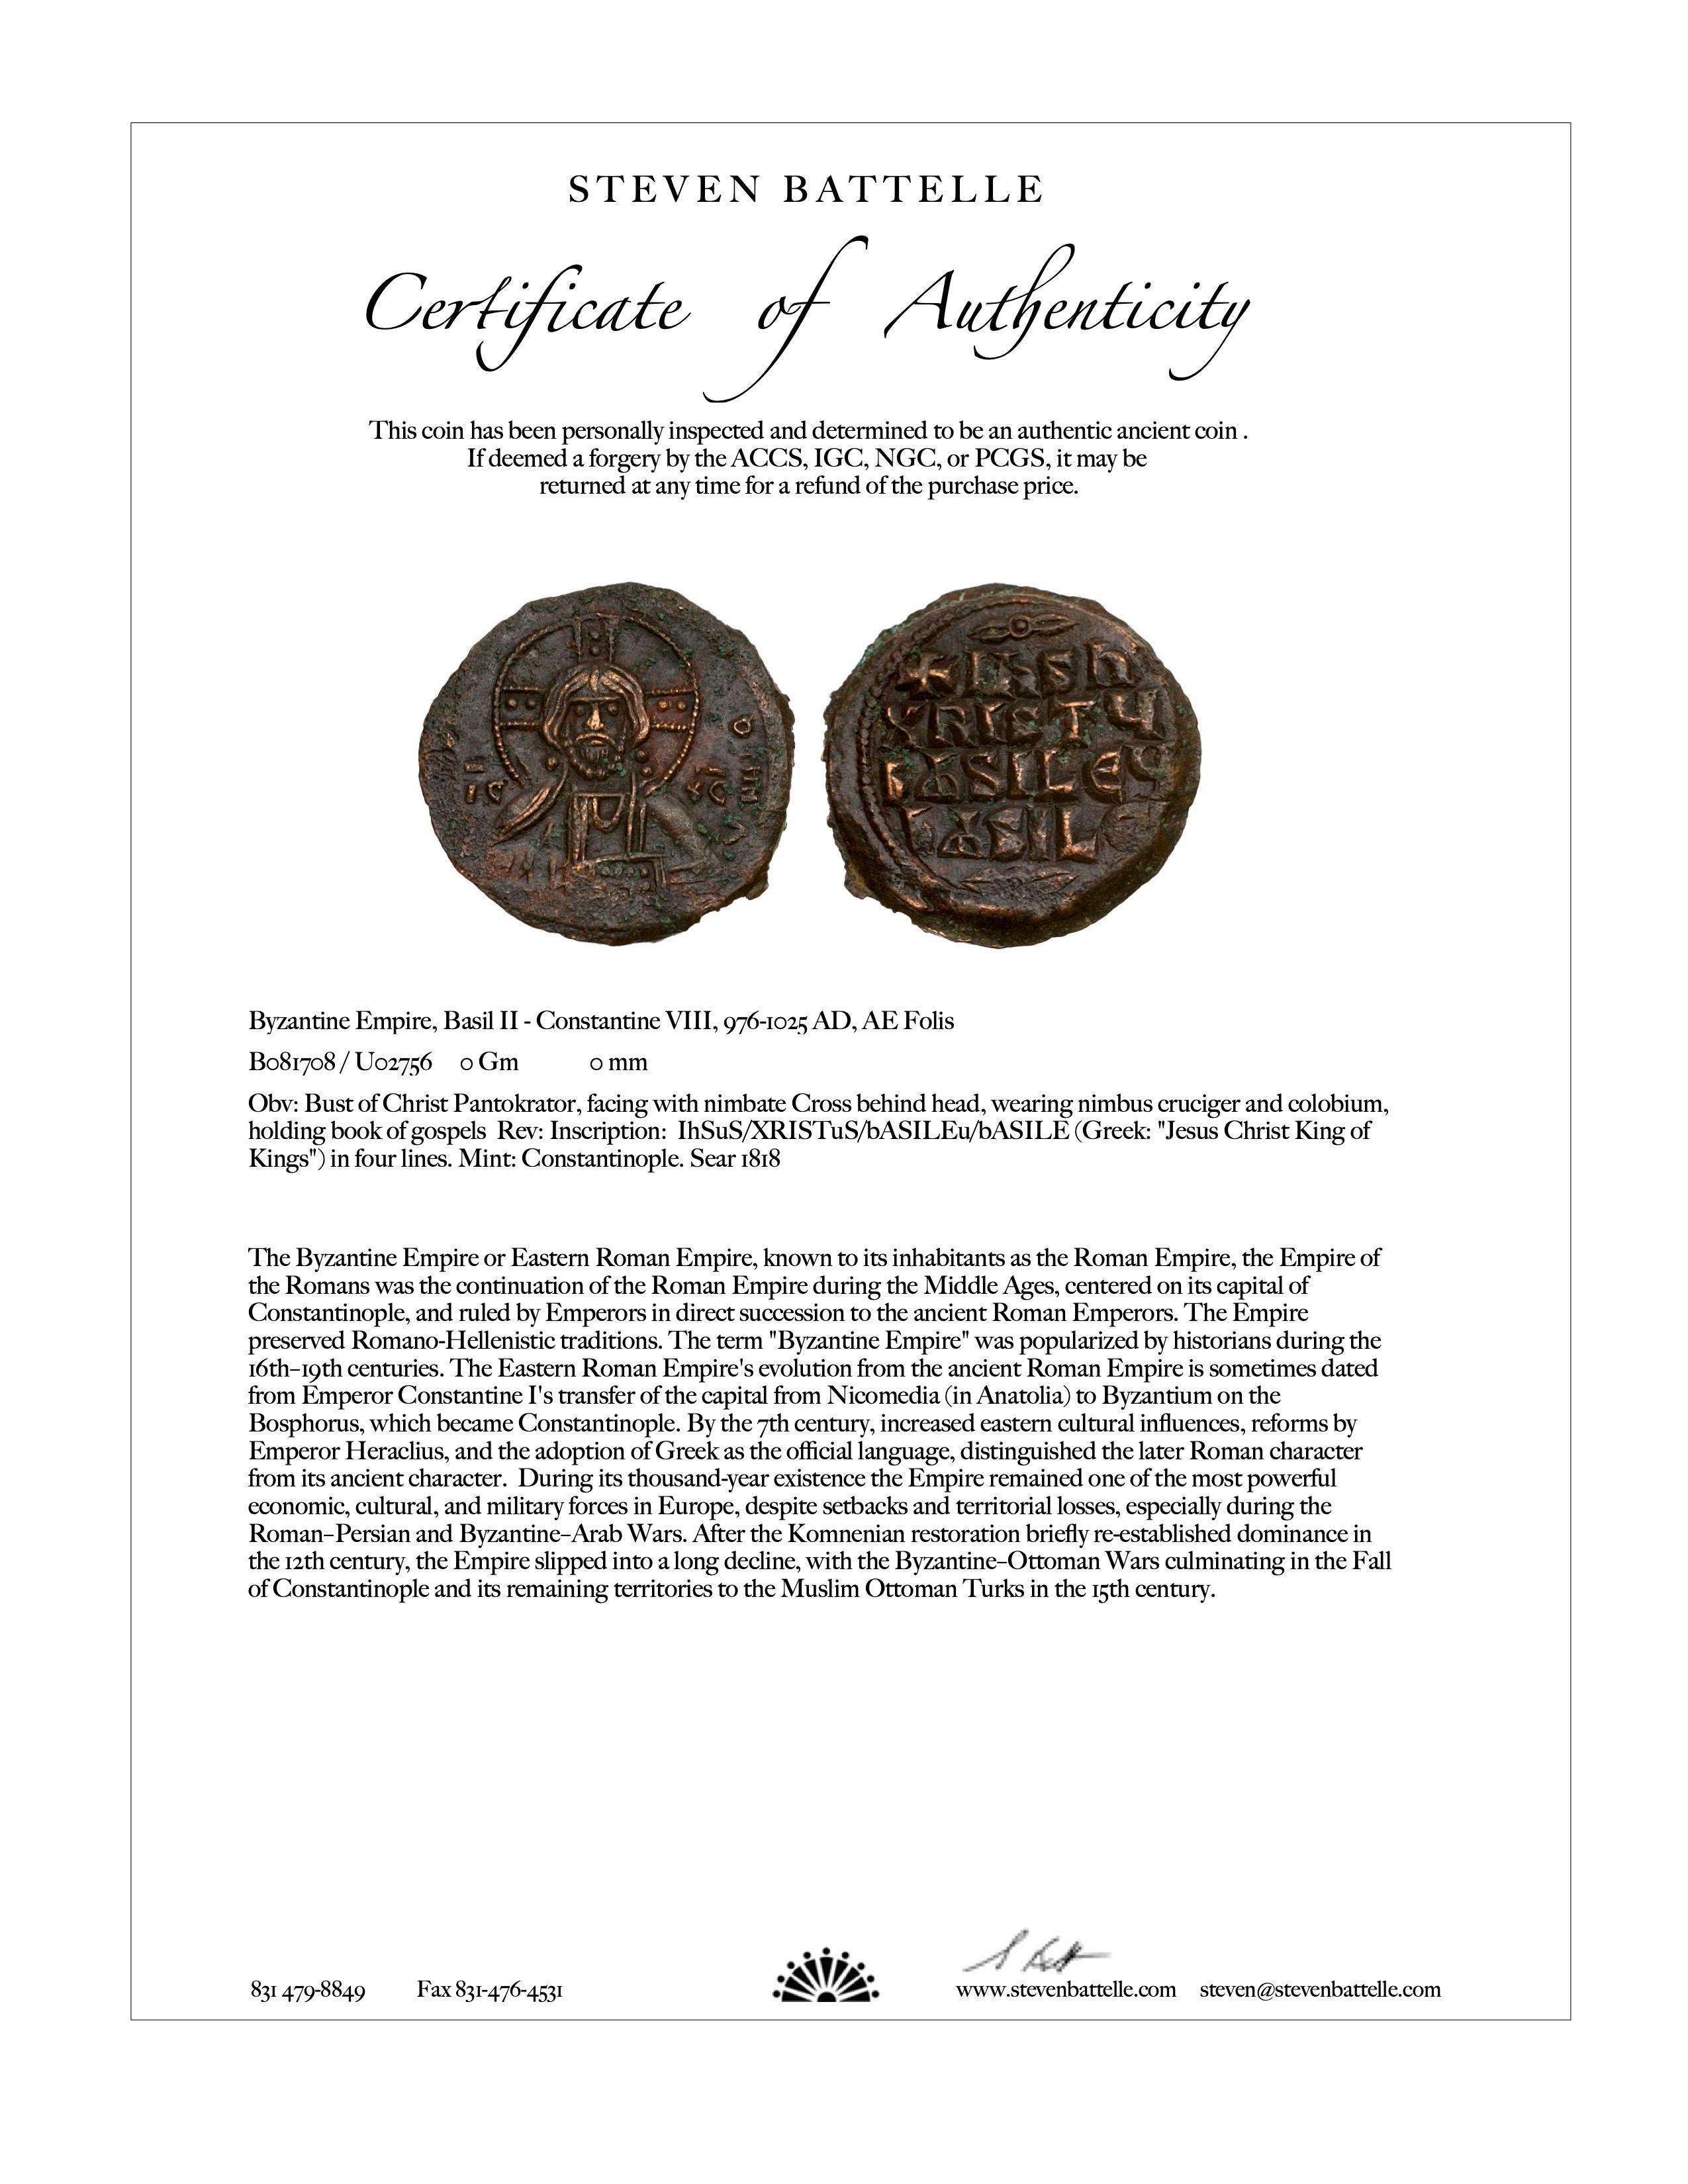 An authentic, sharply struck, large (23mm) bronze coin was issued between 976 to 1025 AD in Constantinople during the realms of the Byzantine Emperors Basil II and Constantine VIII.  This coin depicts Jesus Christ holding a book of gospels with a